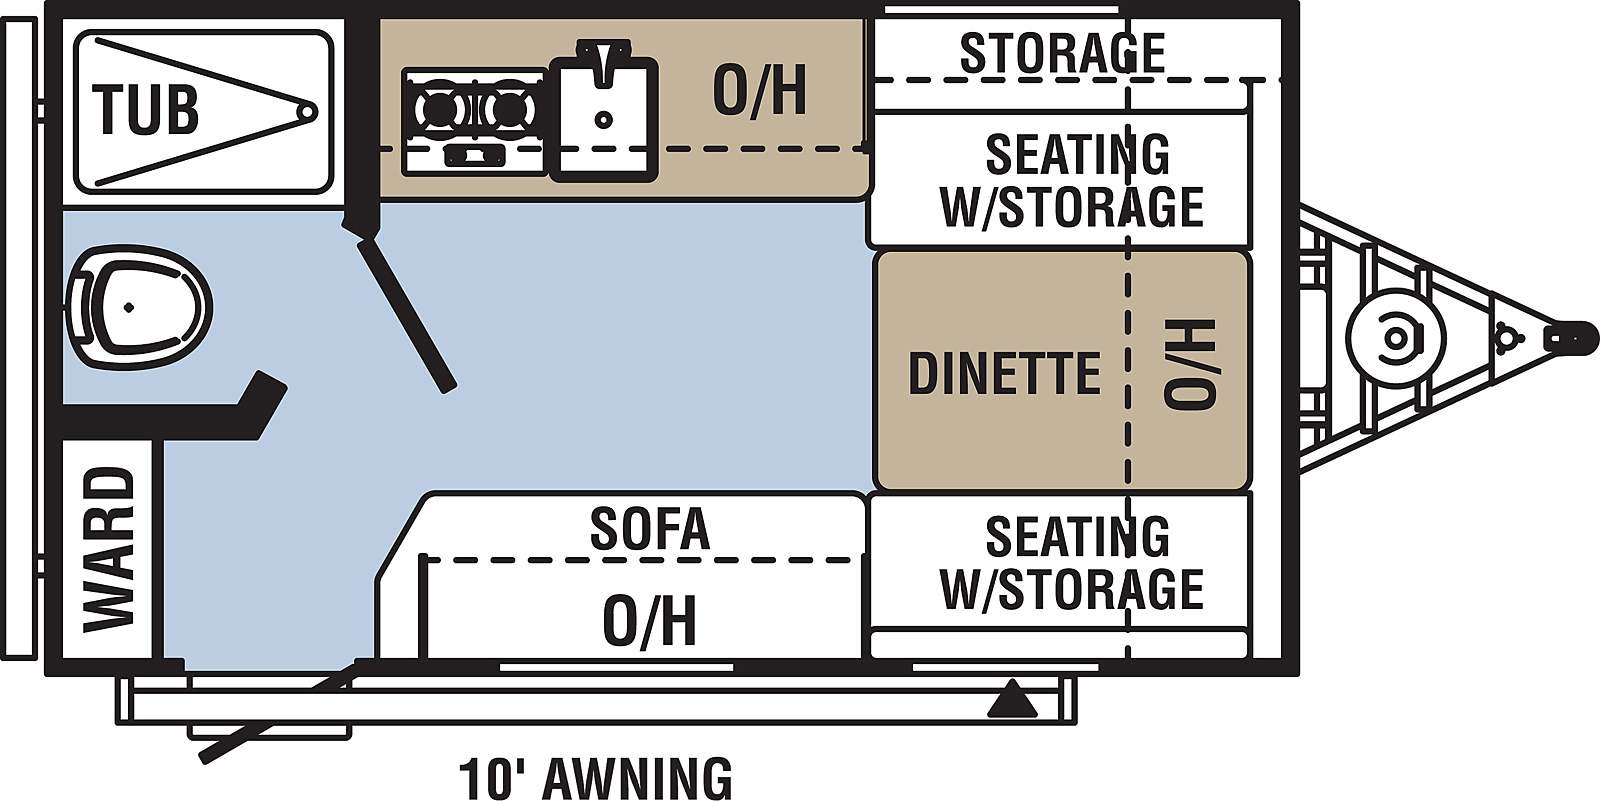 Clipper Ultra-Lite 14CR floorplan. The 14CR has no slide outs and one entry door.